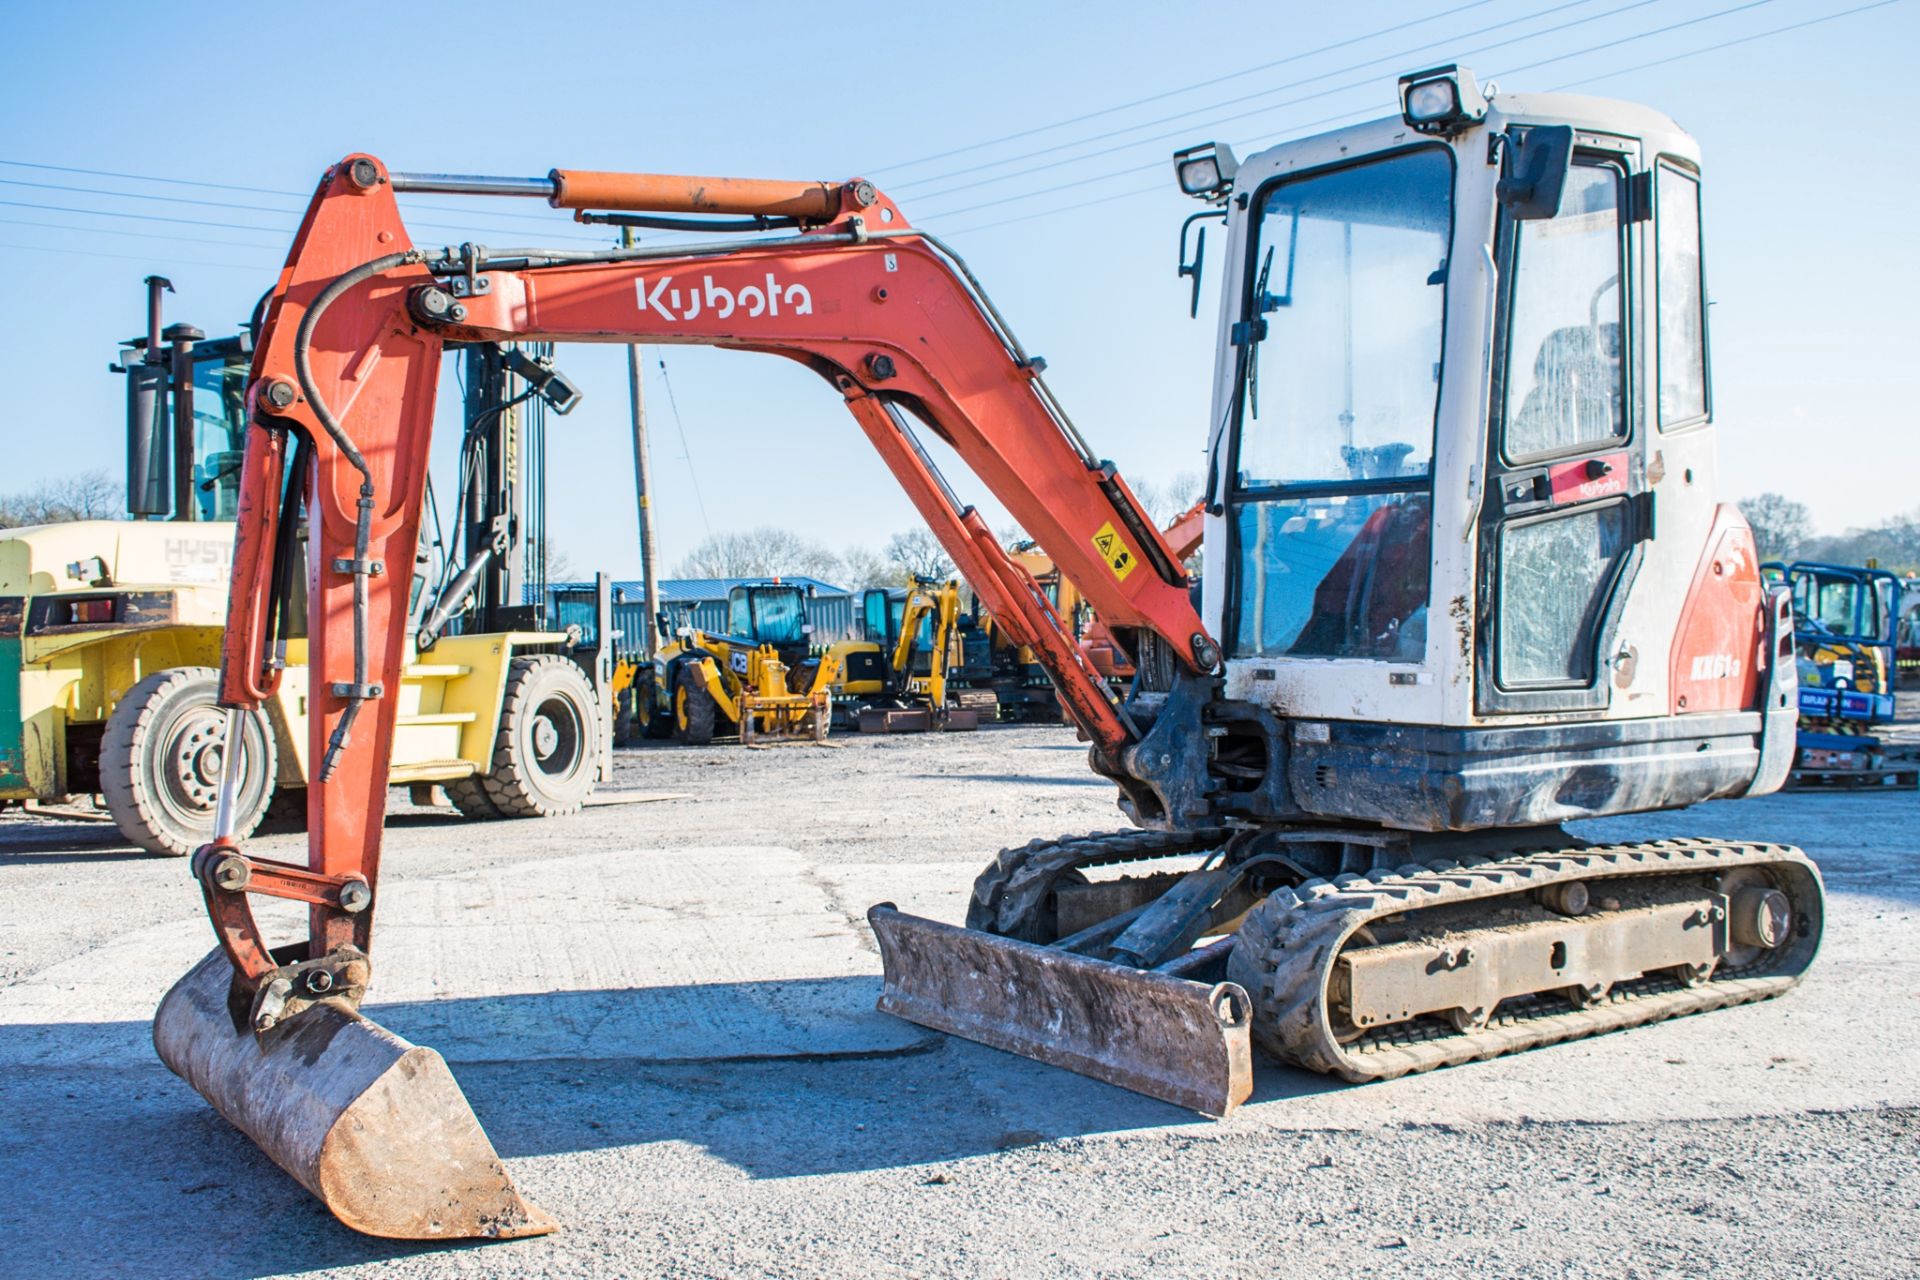 Kubota KX61-3 2.6 tonne rubber tracked excavator Year: 2012 S/N: 79214 Recorded Hours: 3253 blade,